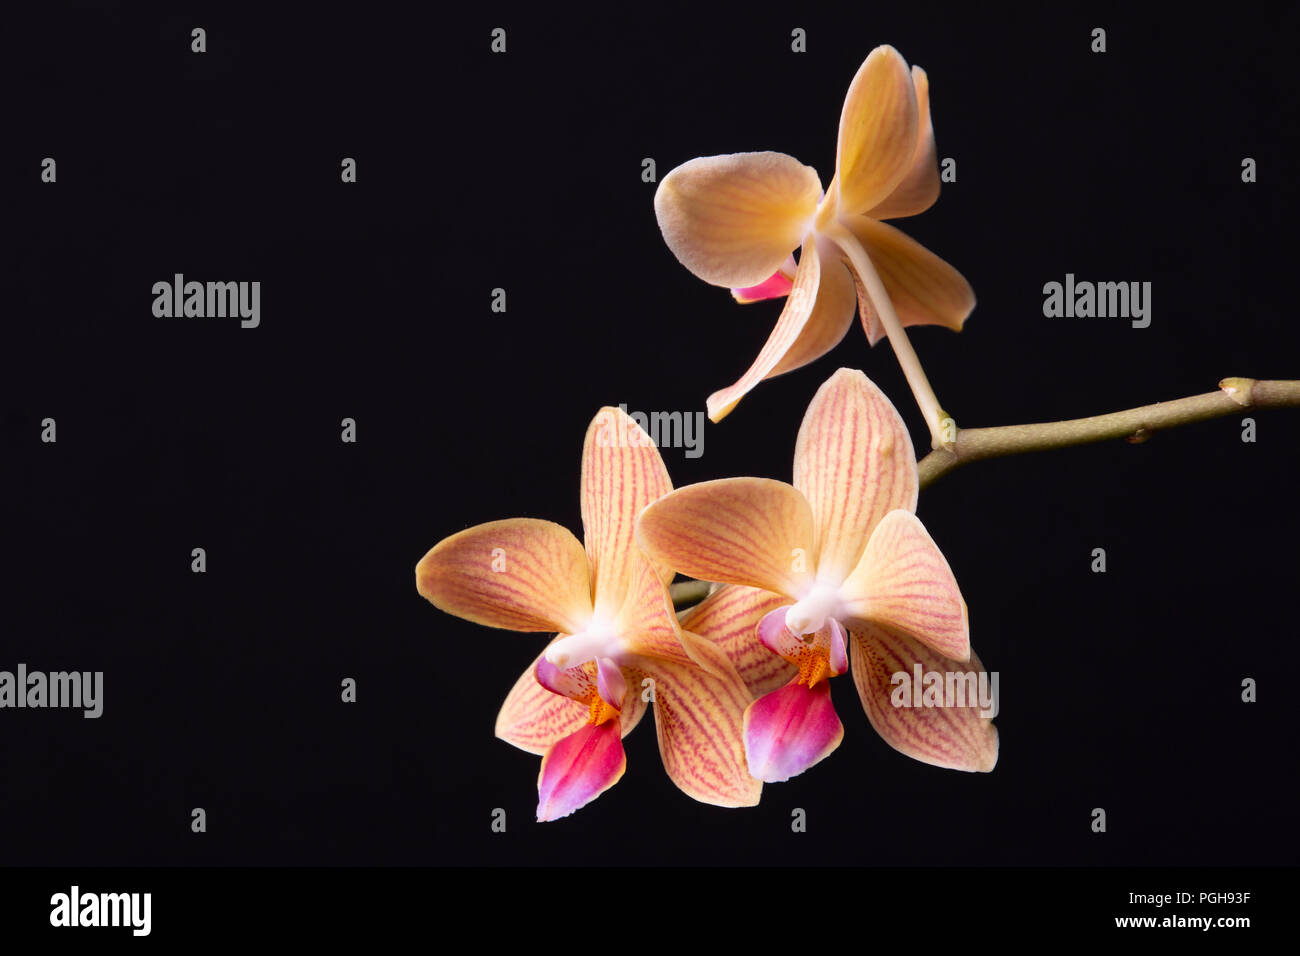 An image of an Orchid stem with three flowers taken against a black background. Stock Photo